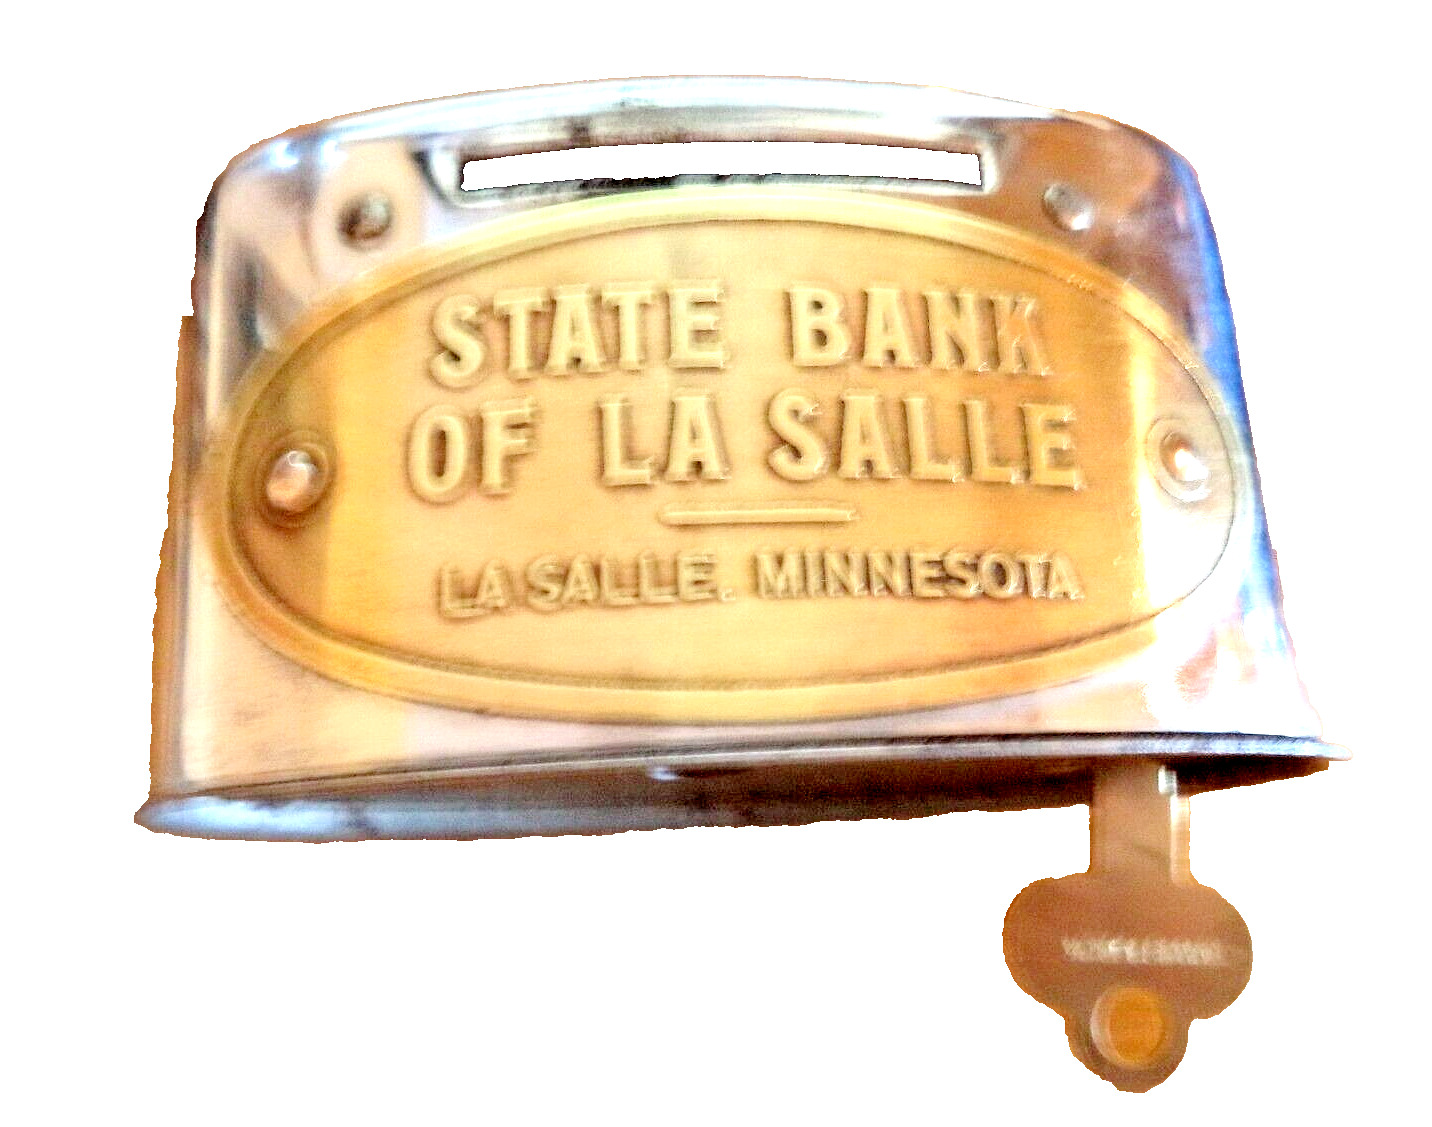 Antique Handle Coin Bank State Bank of LASALLE, MINNESOTA 1 Key